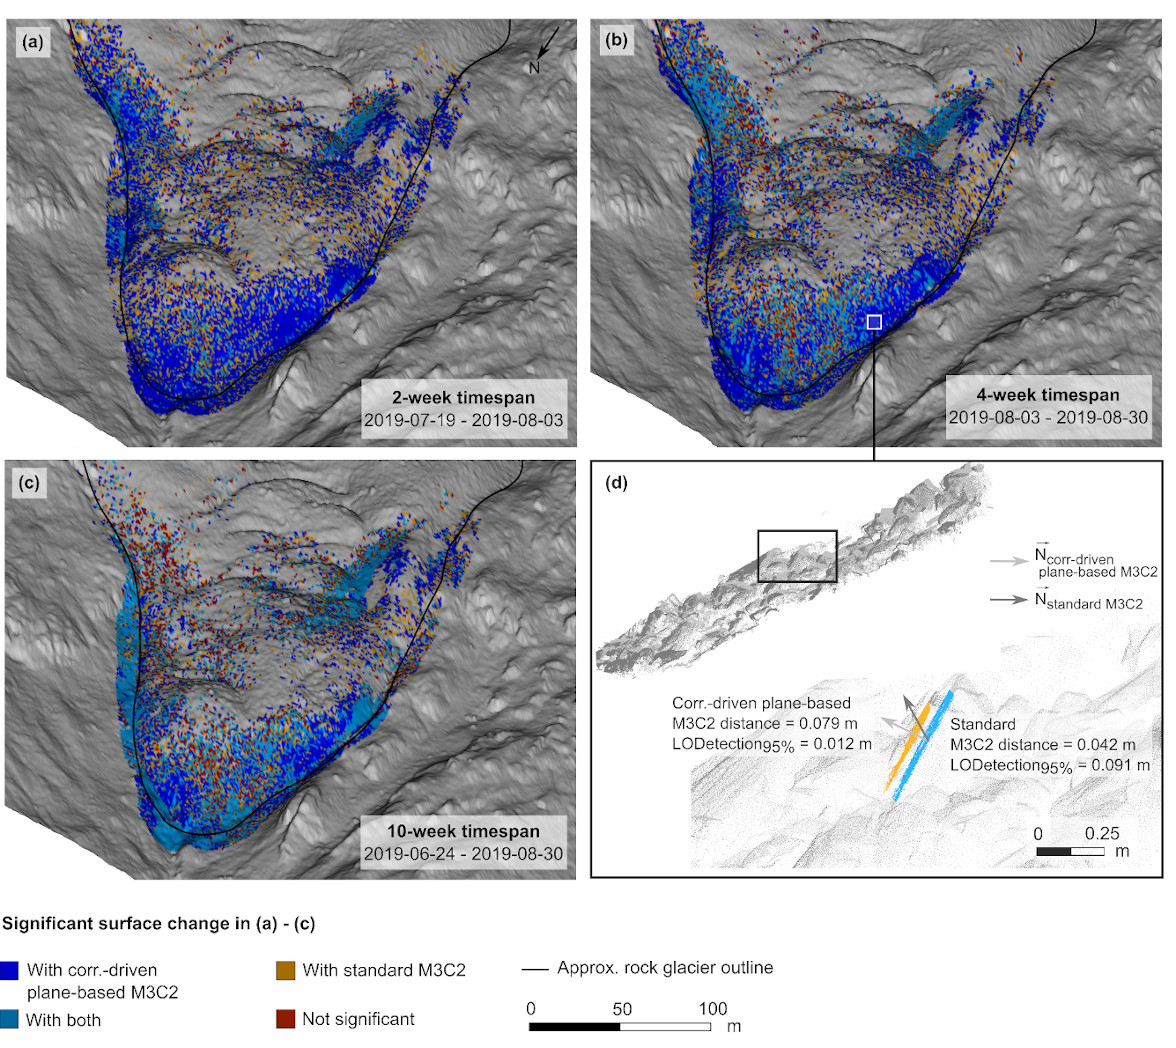 Differences in the significance of surface change derived from the correspondence-driven plane-based M3C2 and standard M3C2 for a (a) 2-week, (b) 4- week, and (c) 10-week timespan on top of a hillshade derived from airborne laser scanning data.